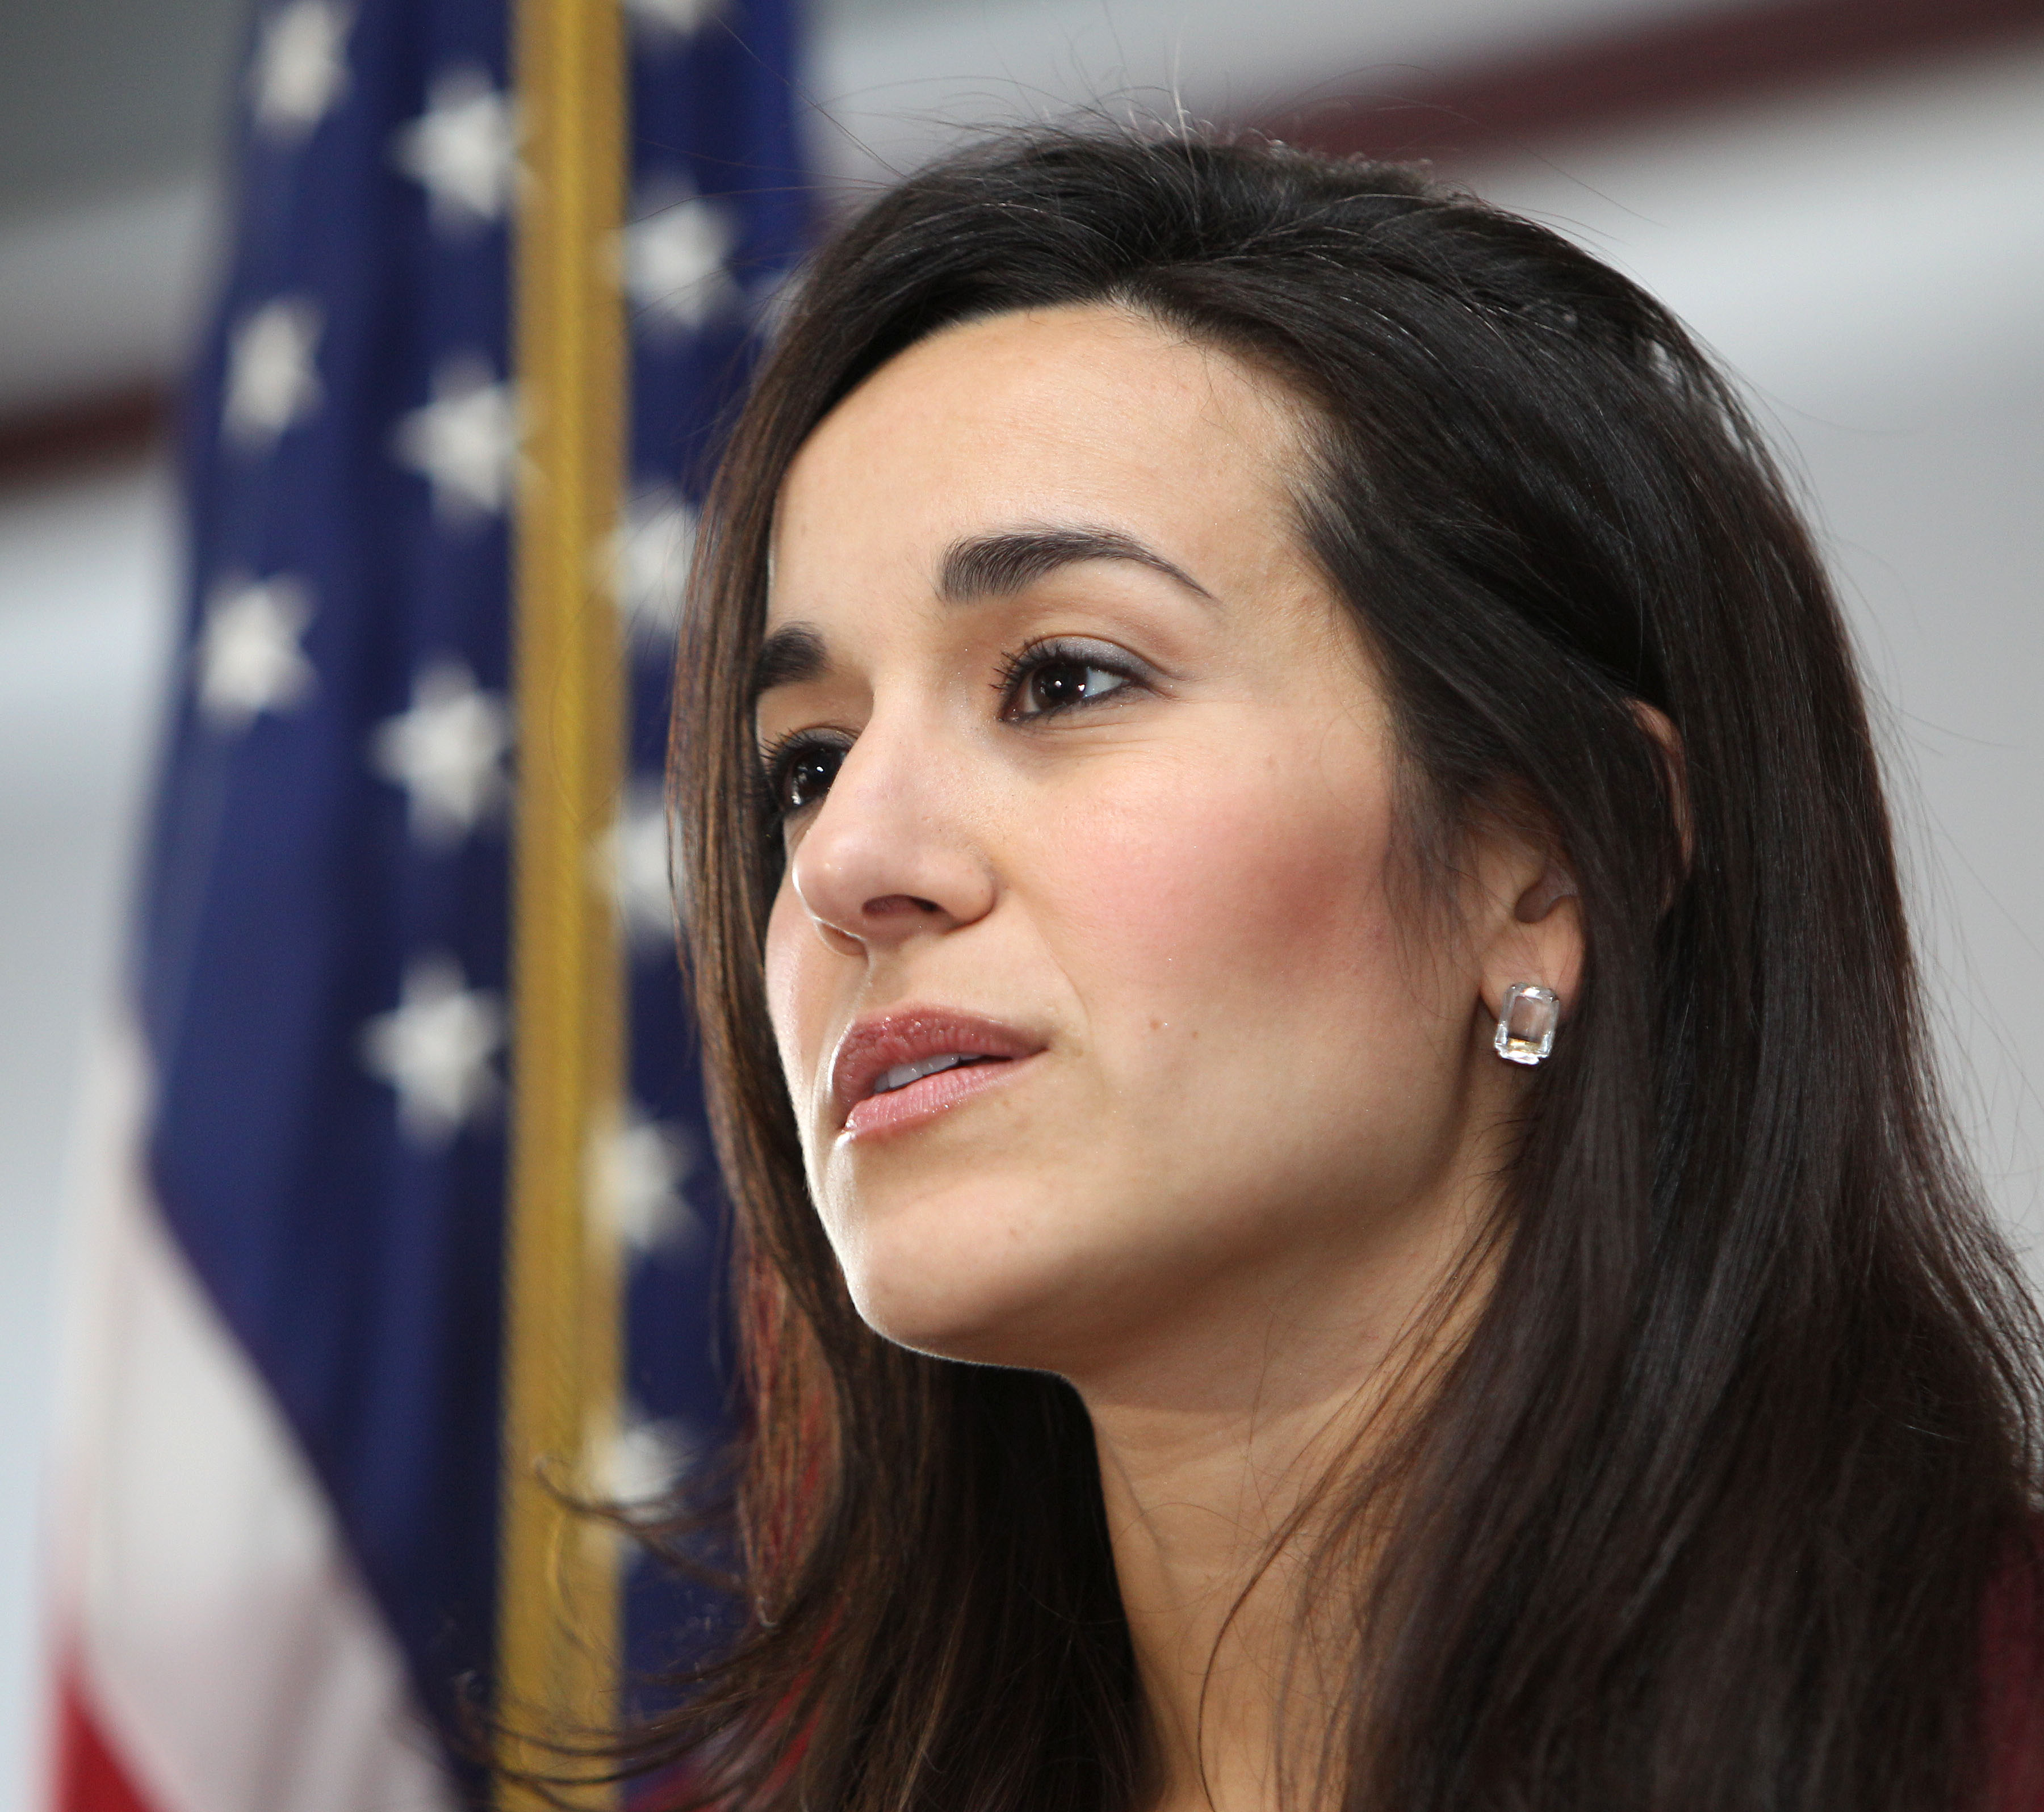 State Representative Marilinda Garcia announces her candidacy for New Hampshire's 2nd  congressional district on Jan. 22, 2014 in Concord, N.H. (Jim Cole—AP)